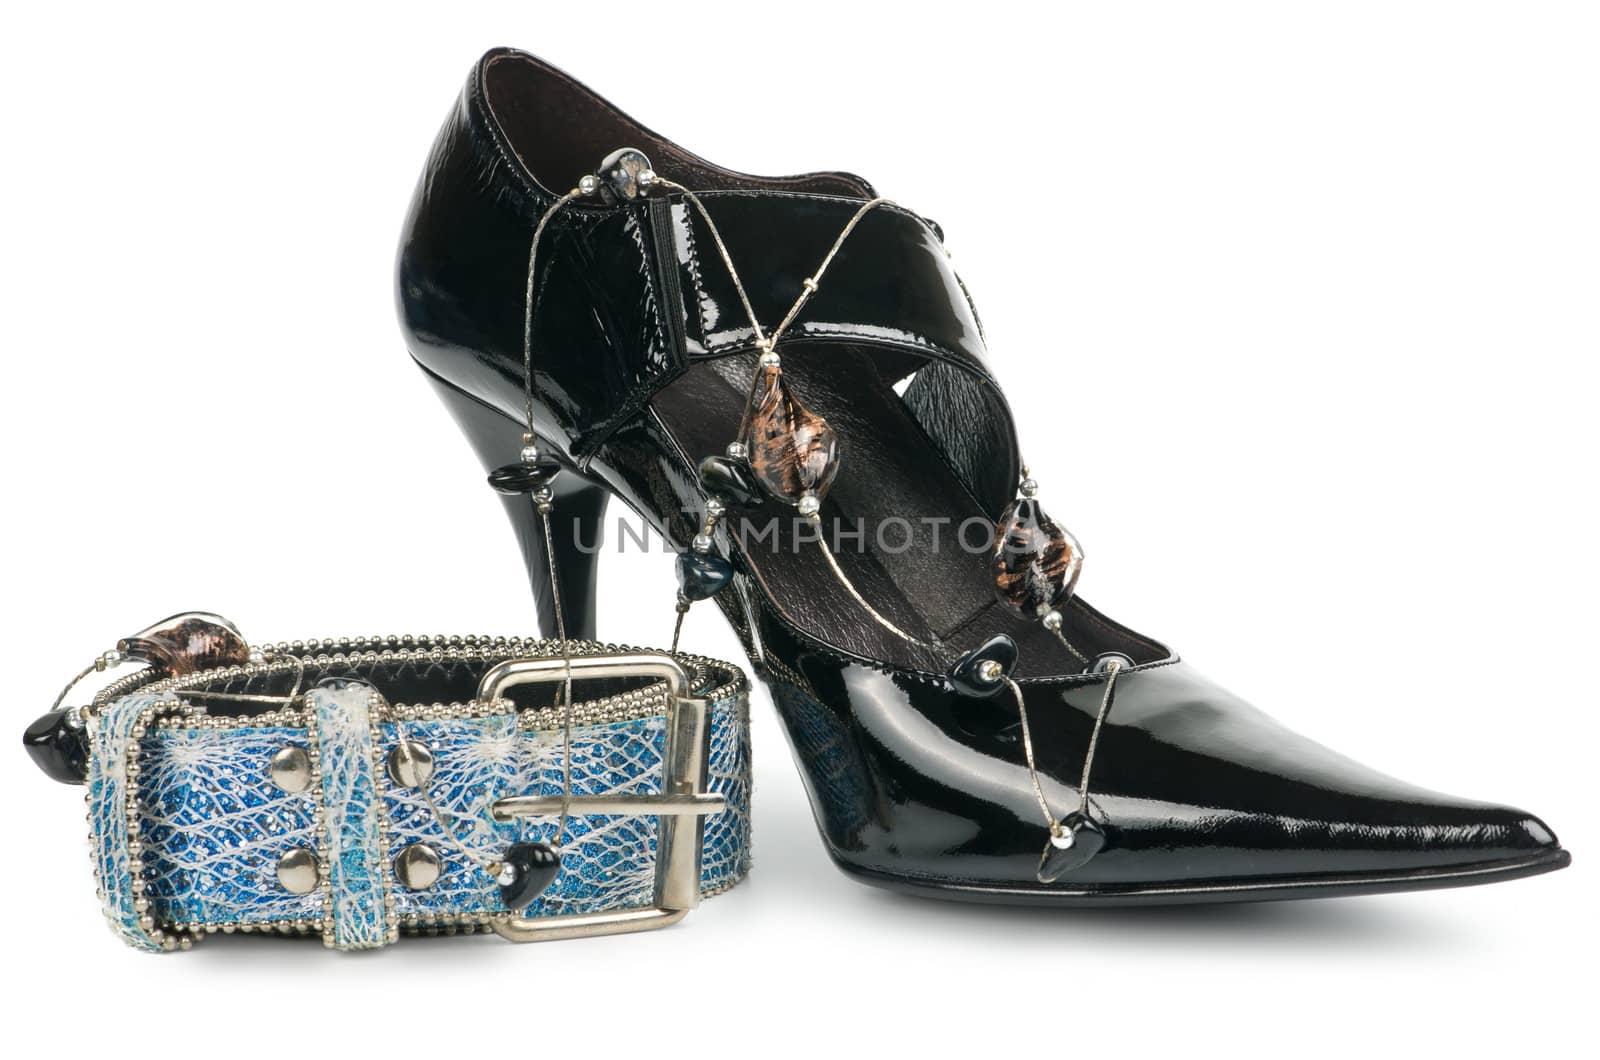 Shoe and belt by eans